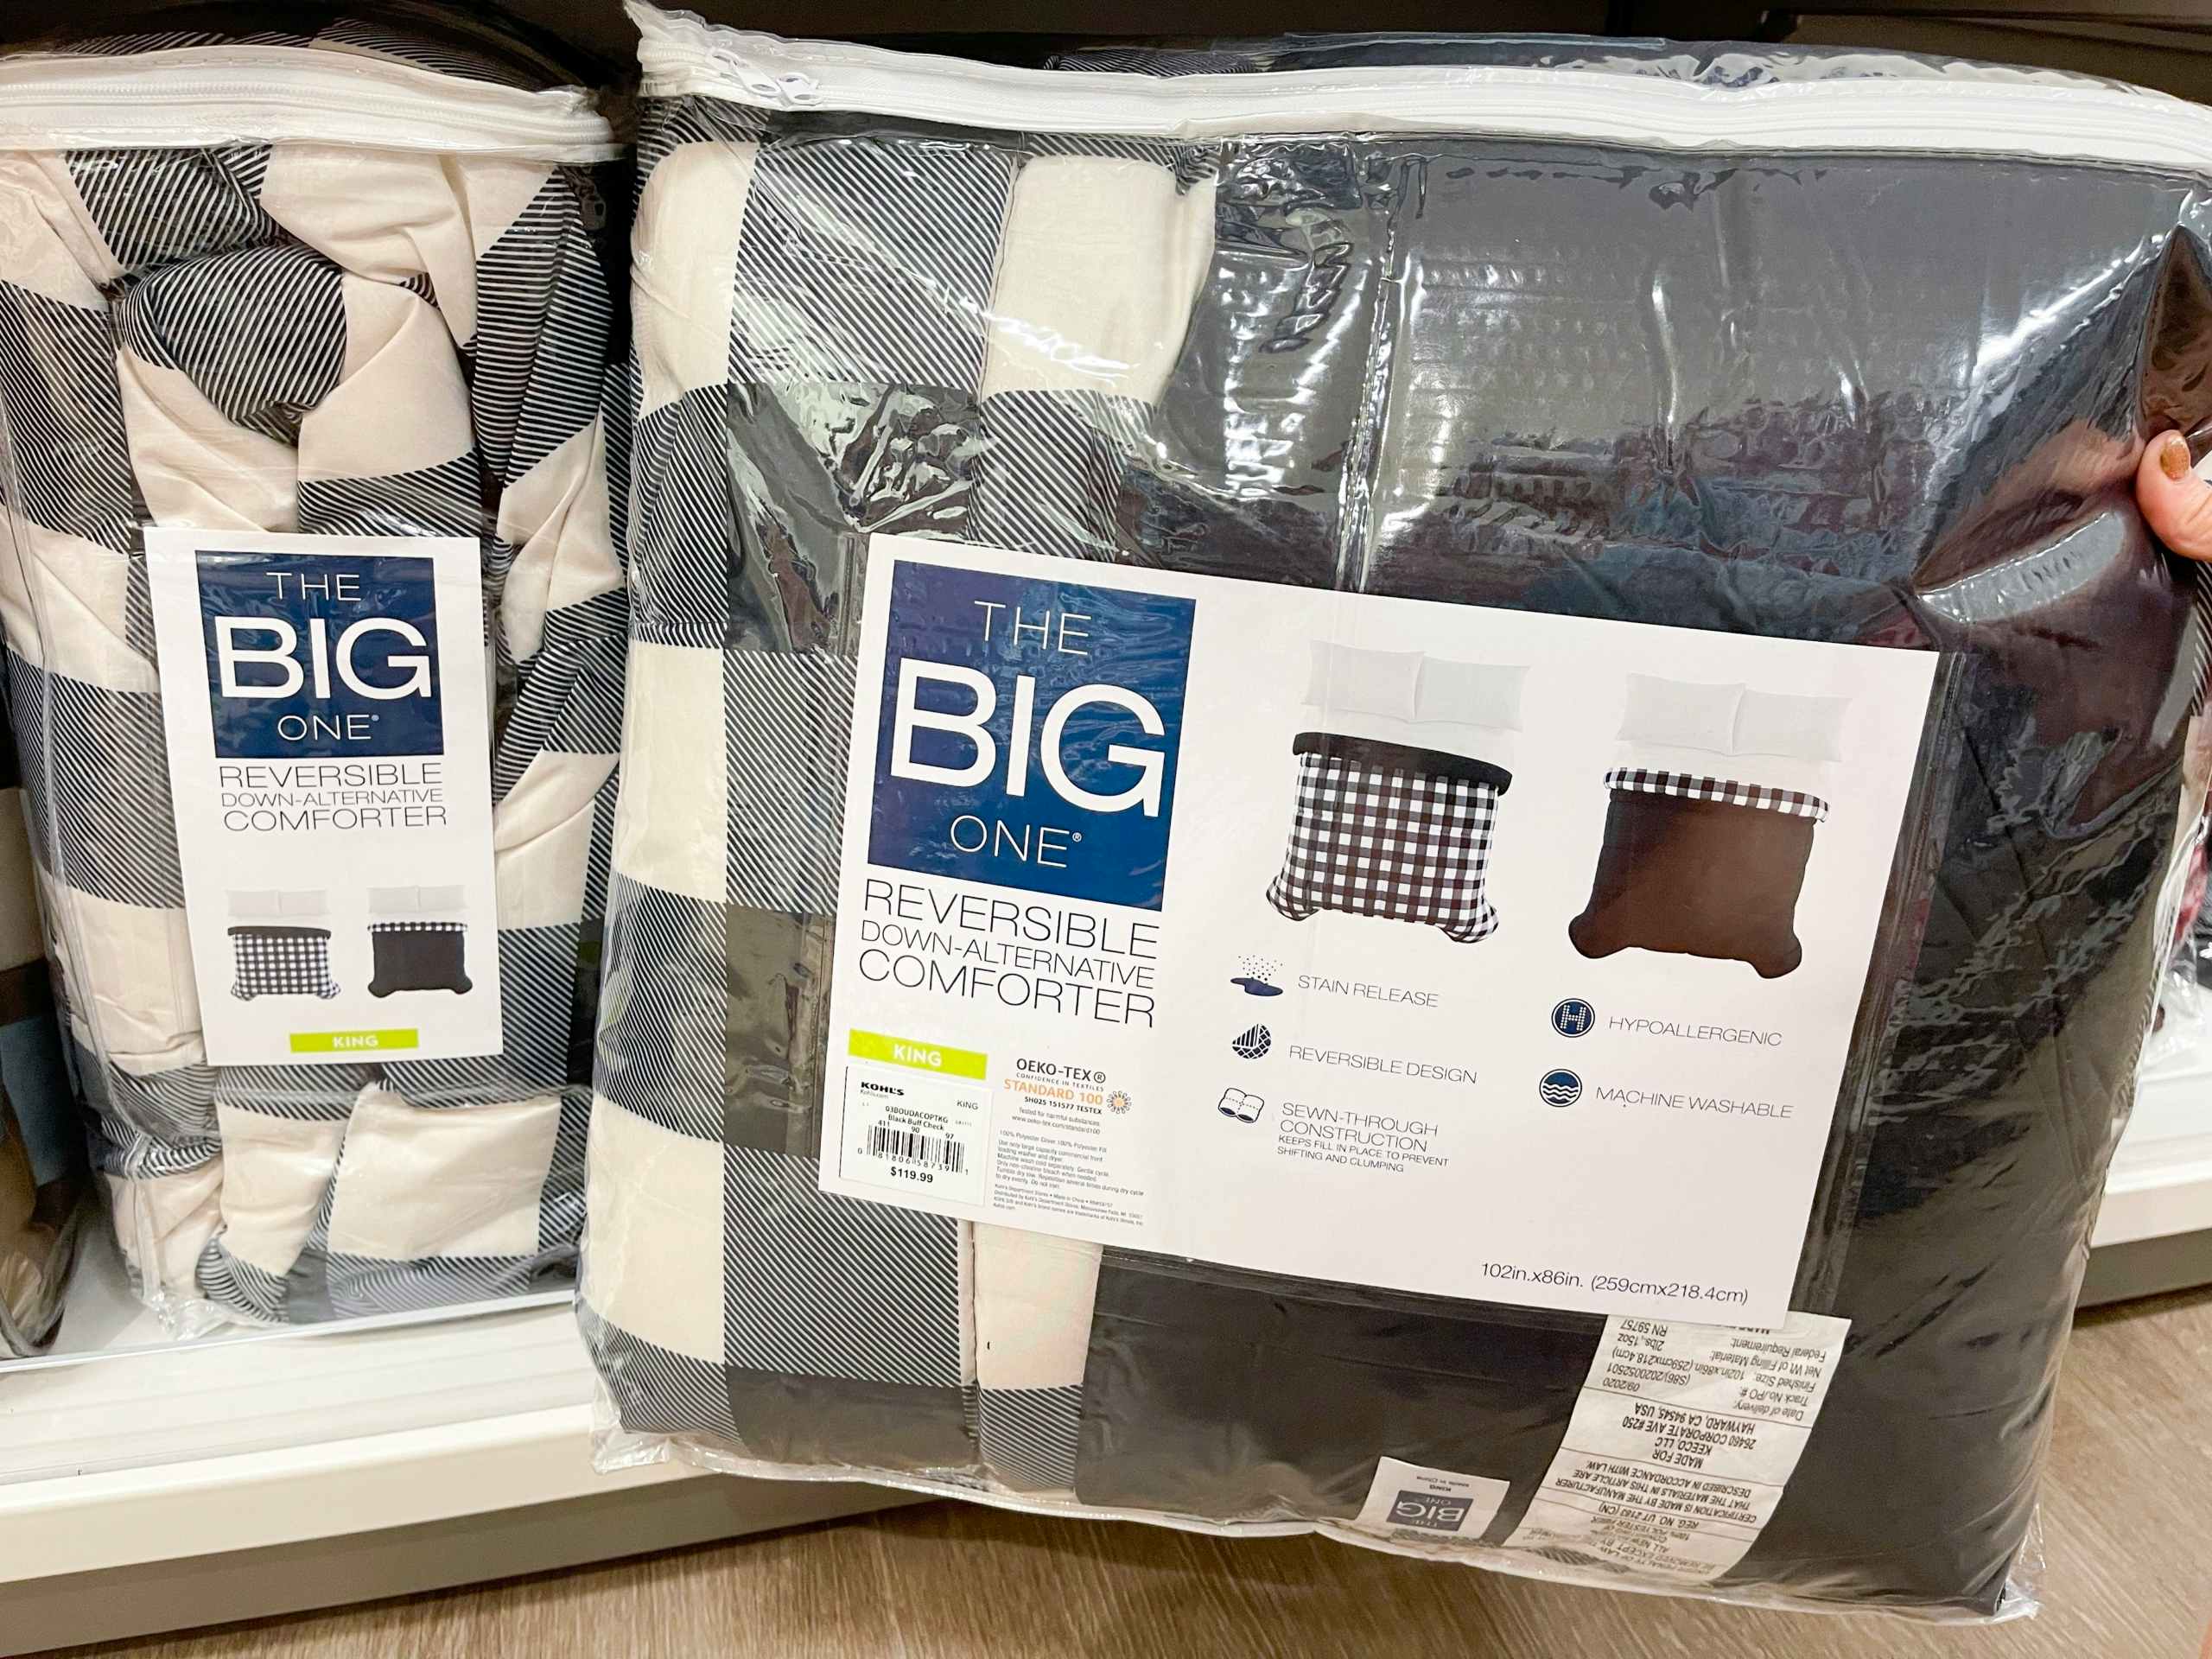 kohls the big one down alternative comforter in store image 2021 5